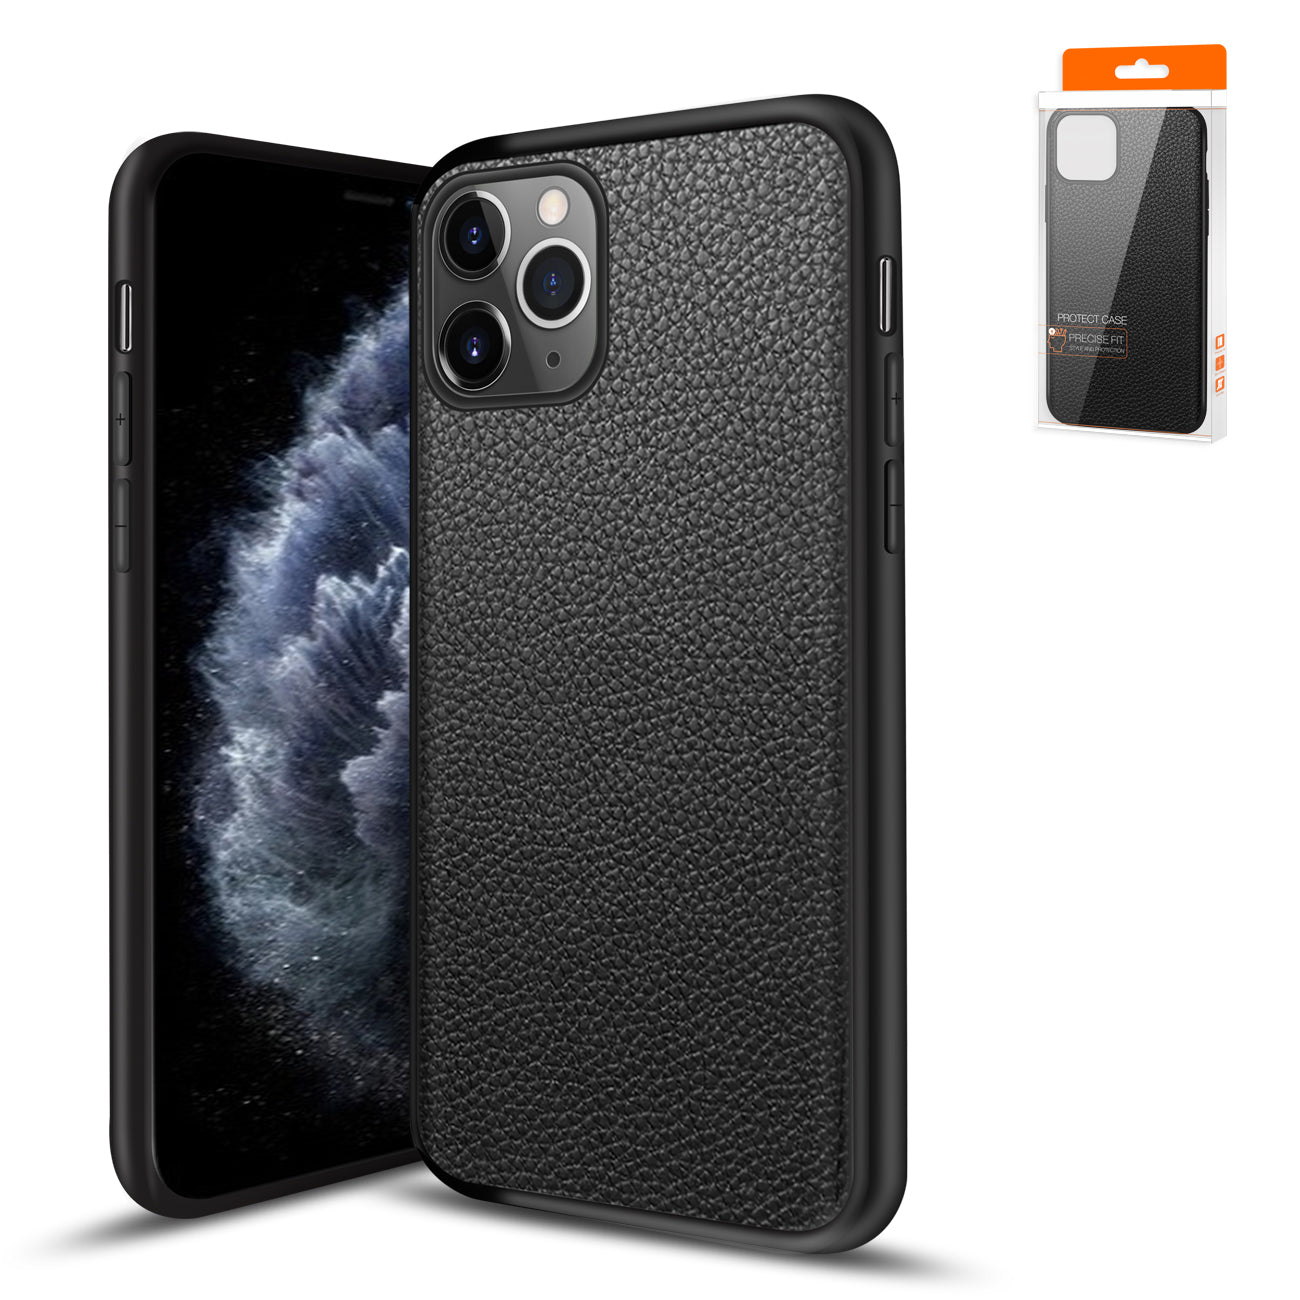 Reiko Premium PU Leather Outside and Flexible TPU Silicone Hybrid Slim Case for IPhone 11 PRO